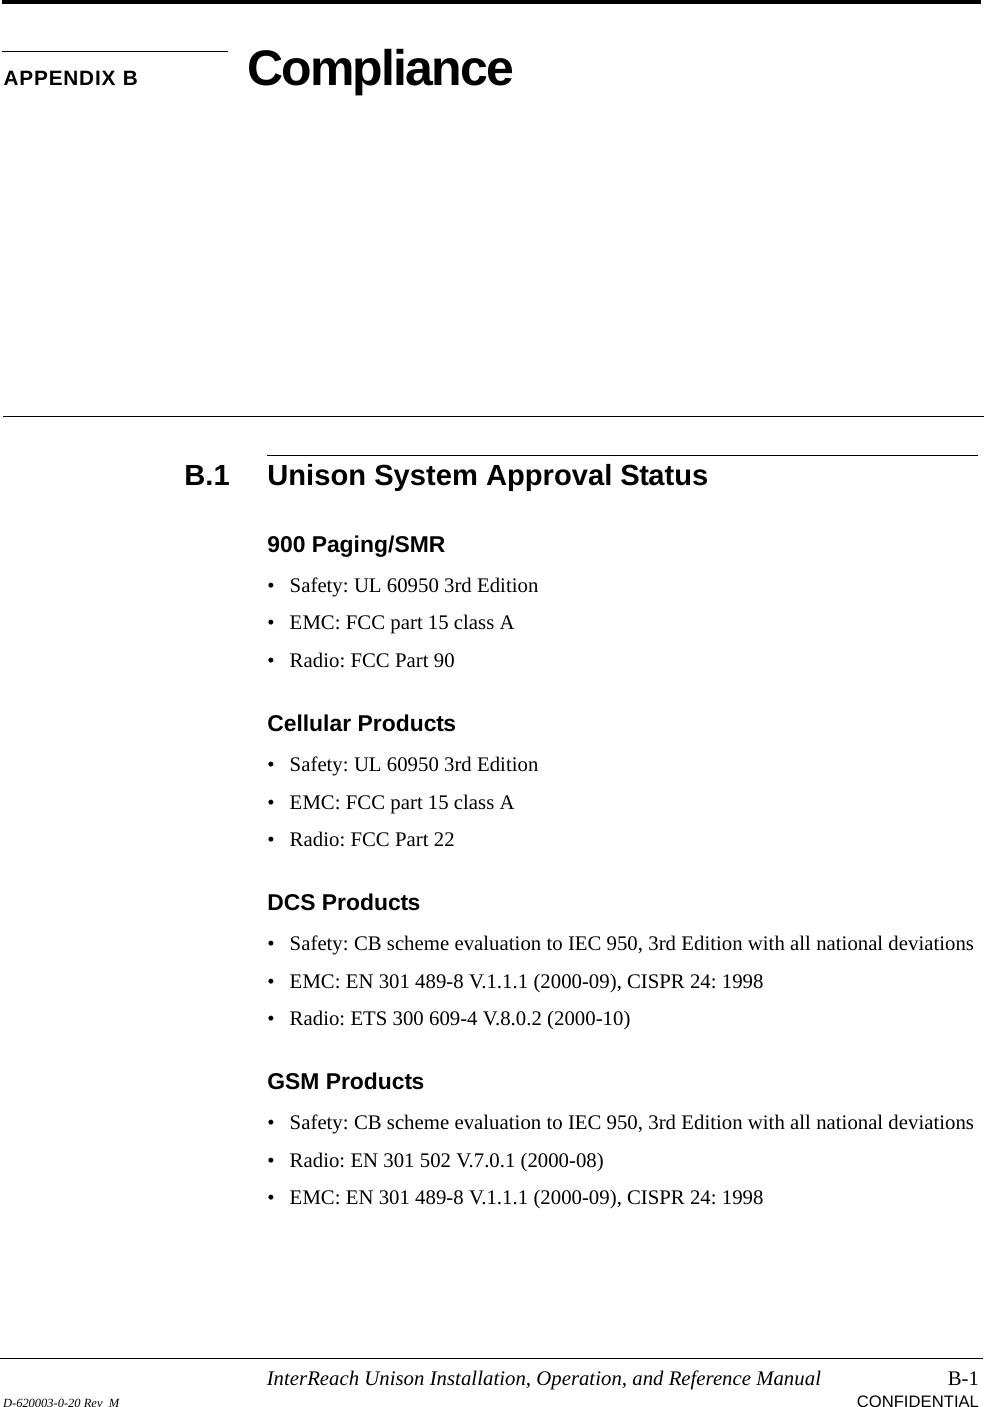 InterReach Unison Installation, Operation, and Reference Manual B-1D-620003-0-20 Rev  M  CONFIDENTIALAPPENDIX B ComplianceB.1 Unison System Approval Status900 Paging/SMR• Safety: UL 60950 3rd Edition• EMC: FCC part 15 class A• Radio: FCC Part 90Cellular Products• Safety: UL 60950 3rd Edition• EMC: FCC part 15 class A• Radio: FCC Part 22DCS Products• Safety: CB scheme evaluation to IEC 950, 3rd Edition with all national deviations• EMC: EN 301 489-8 V.1.1.1 (2000-09), CISPR 24: 1998• Radio: ETS 300 609-4 V.8.0.2 (2000-10)GSM Products• Safety: CB scheme evaluation to IEC 950, 3rd Edition with all national deviations• Radio: EN 301 502 V.7.0.1 (2000-08)• EMC: EN 301 489-8 V.1.1.1 (2000-09), CISPR 24: 1998